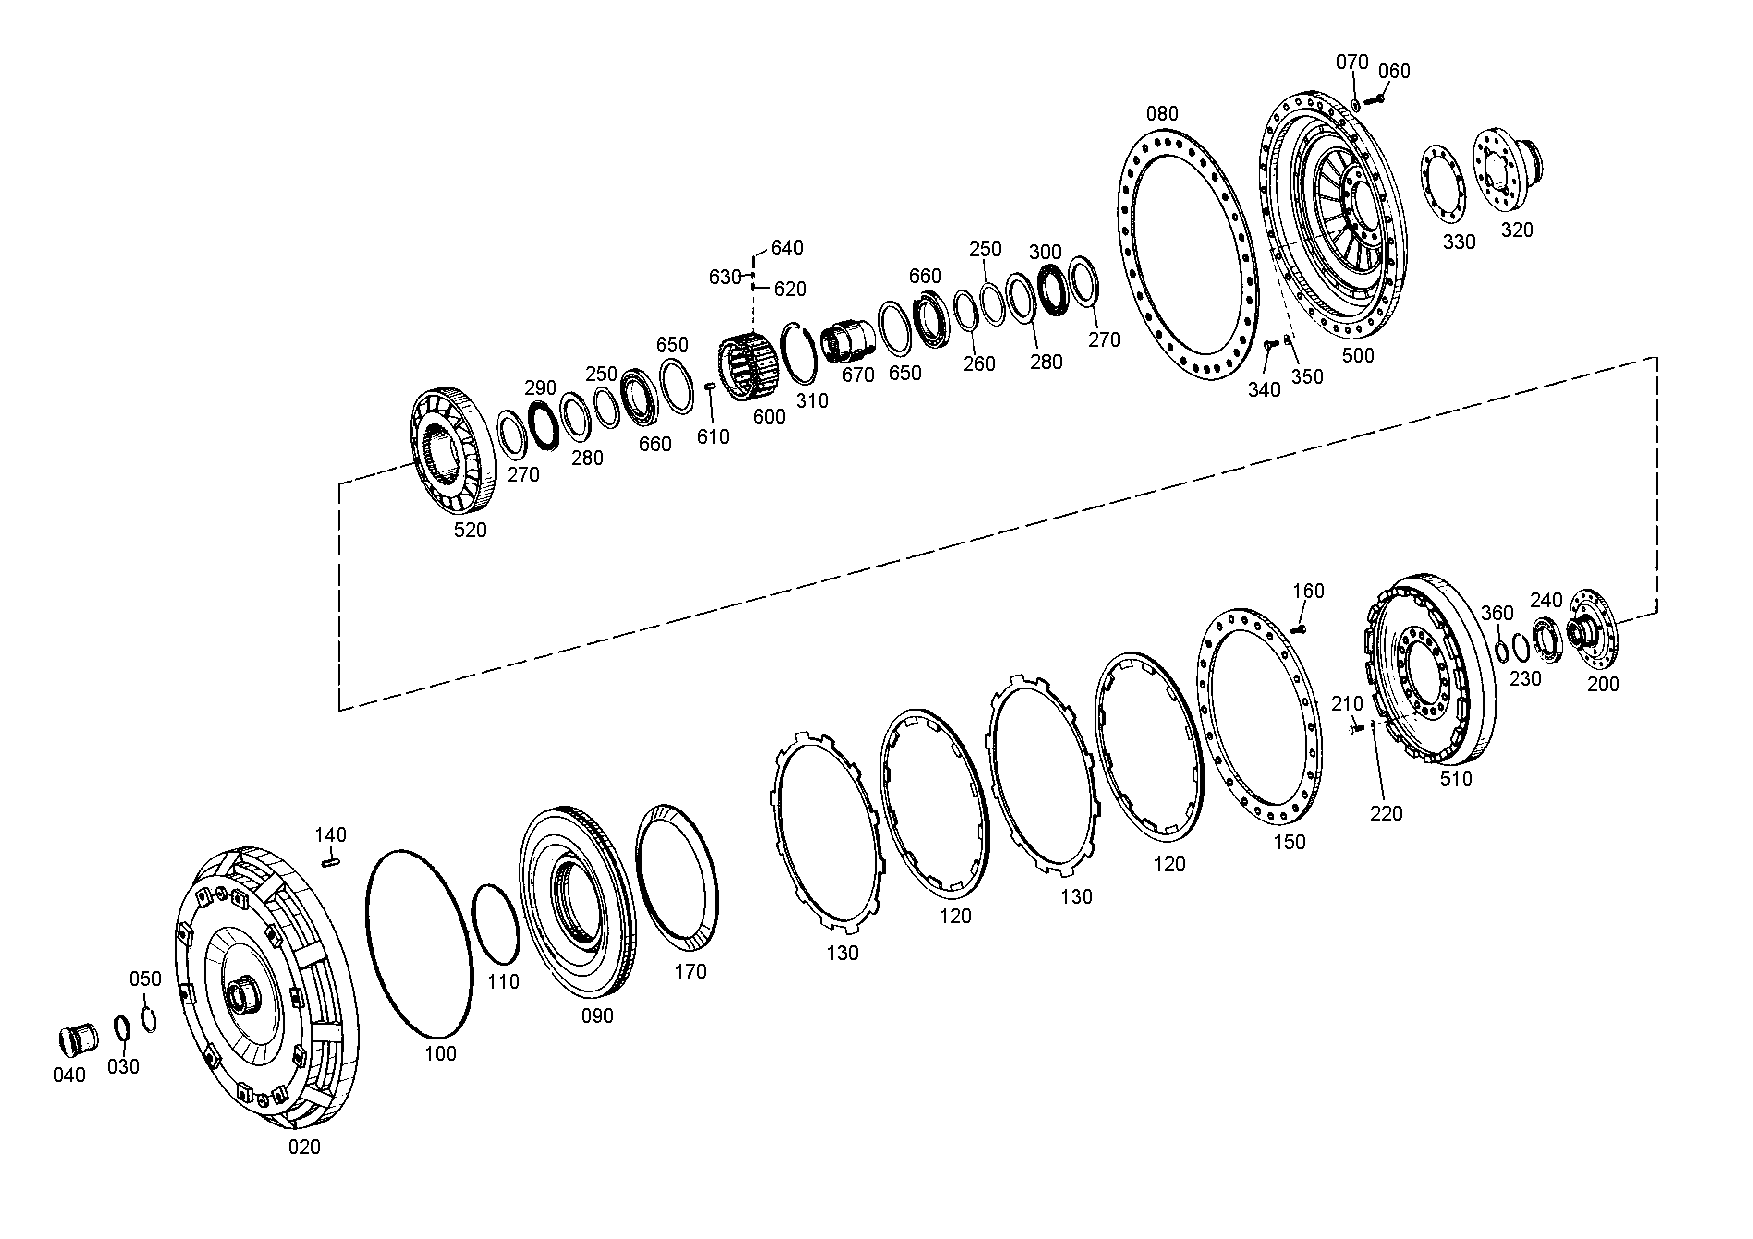 drawing for PPM 09398056 - PUMP FLANGE (figure 3)